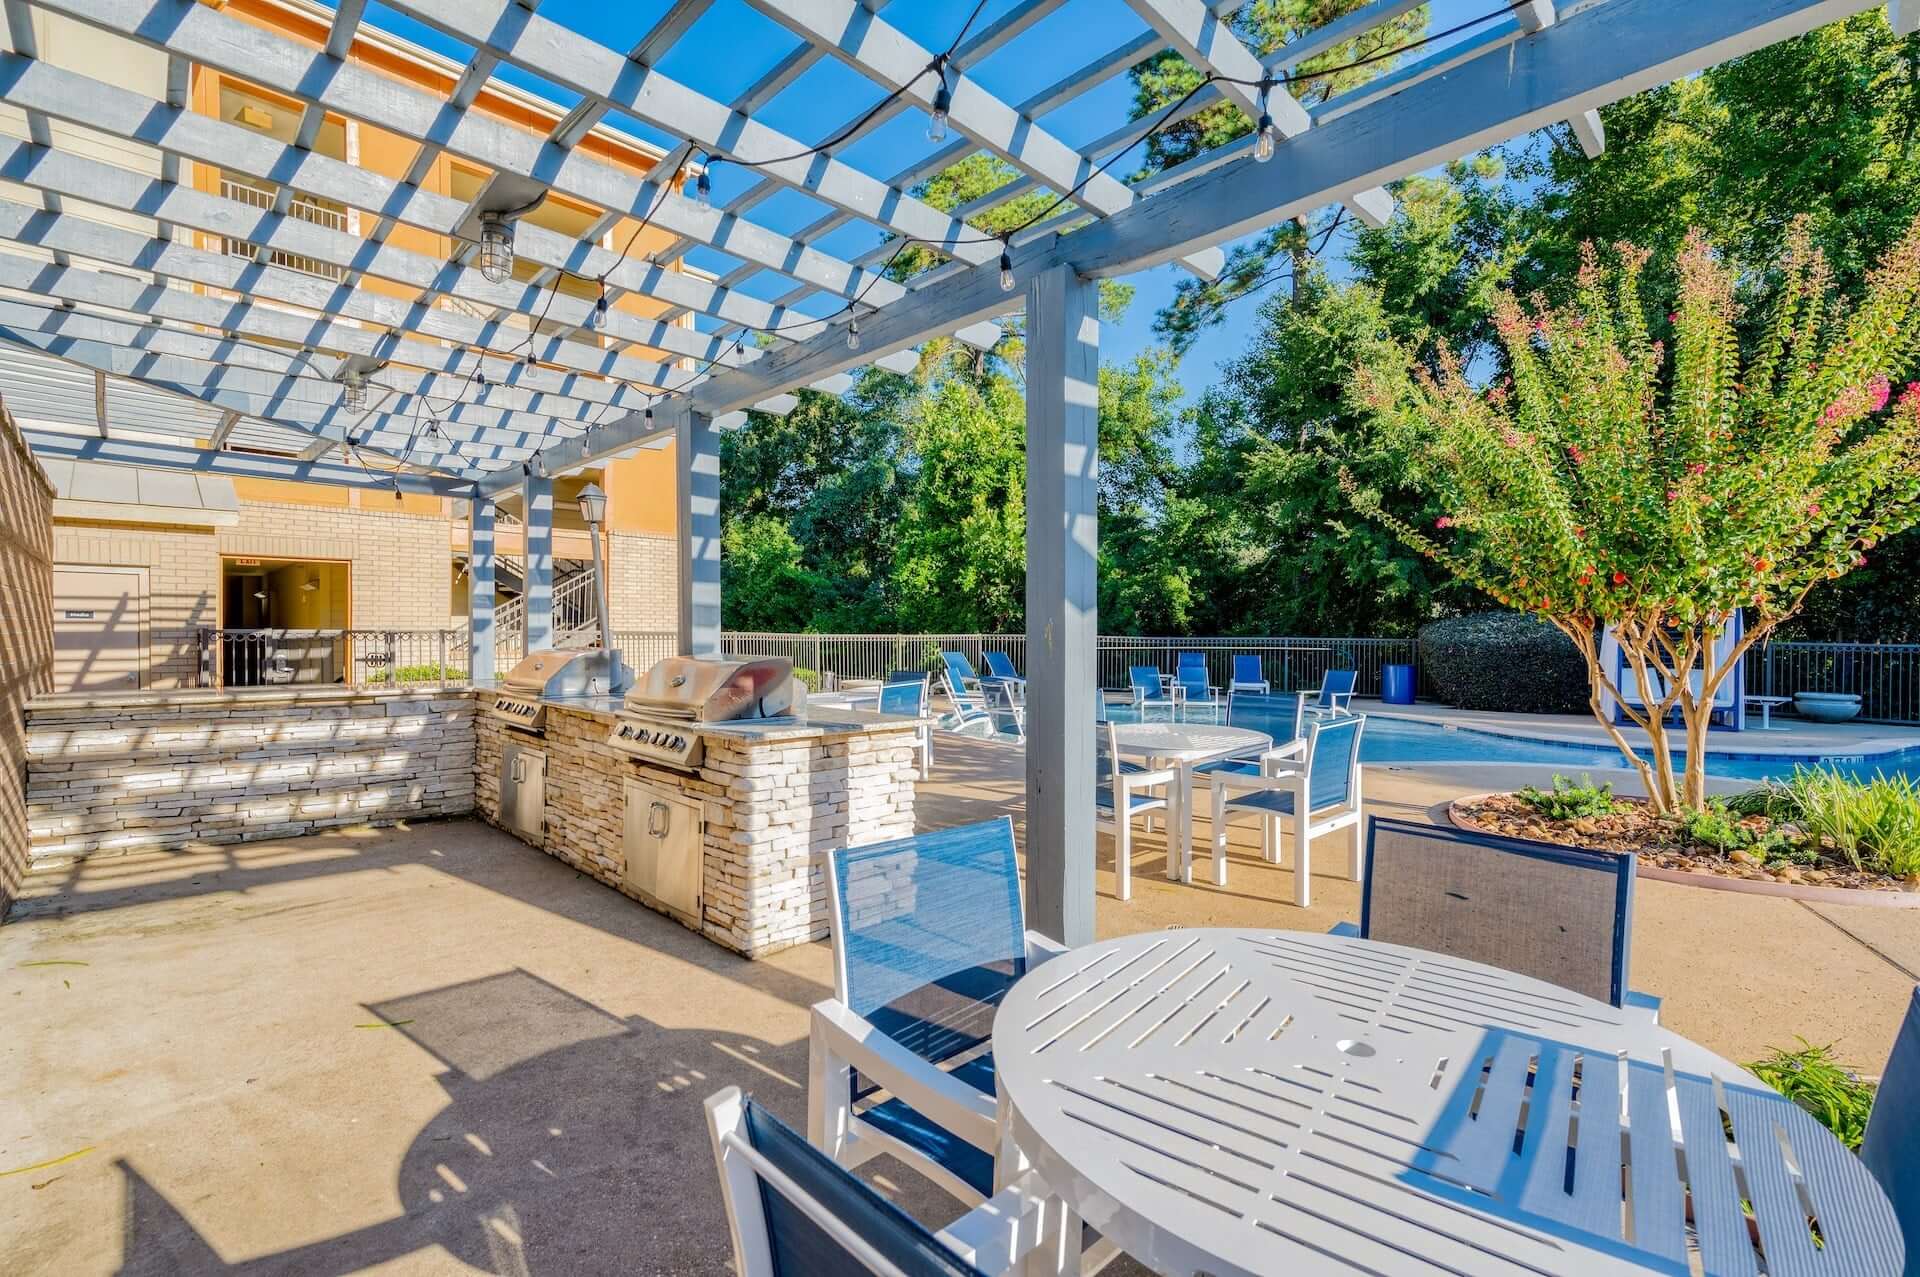 outdoor lounge area by the pool at republic at sam houston apartments